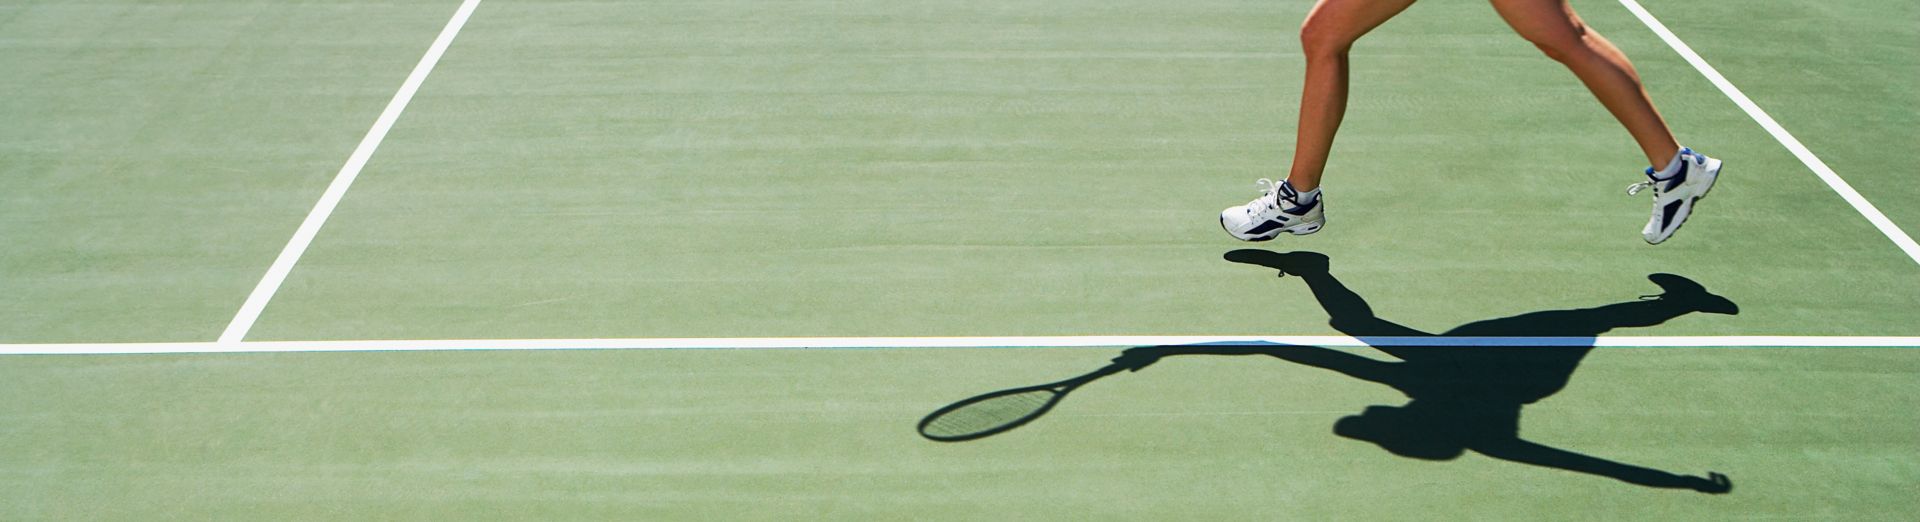 A person on a tennis court